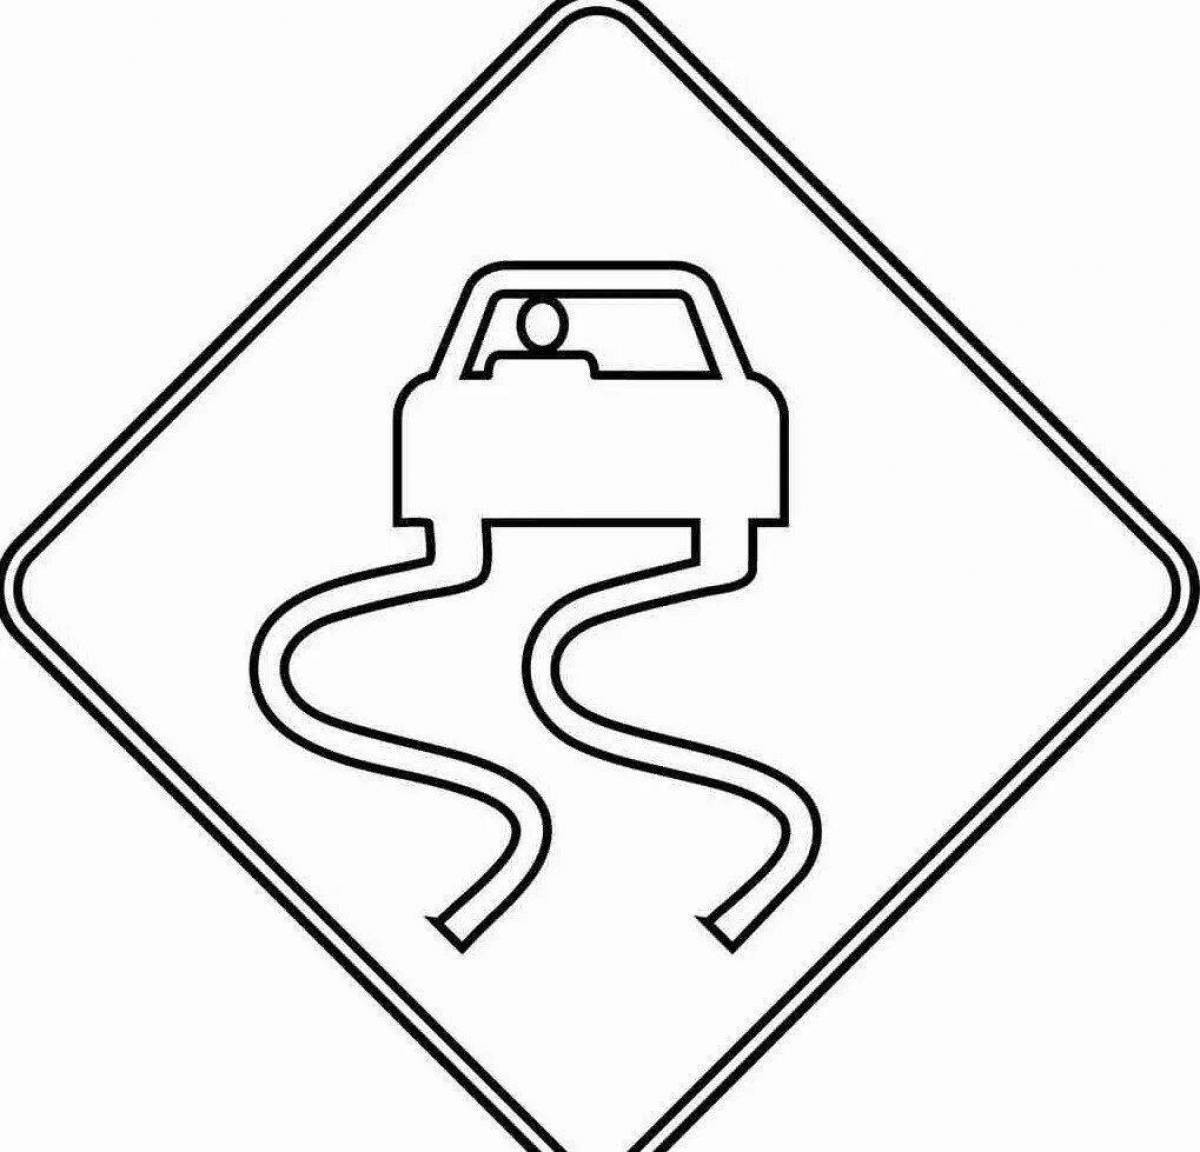 Coloring page joyful road sign